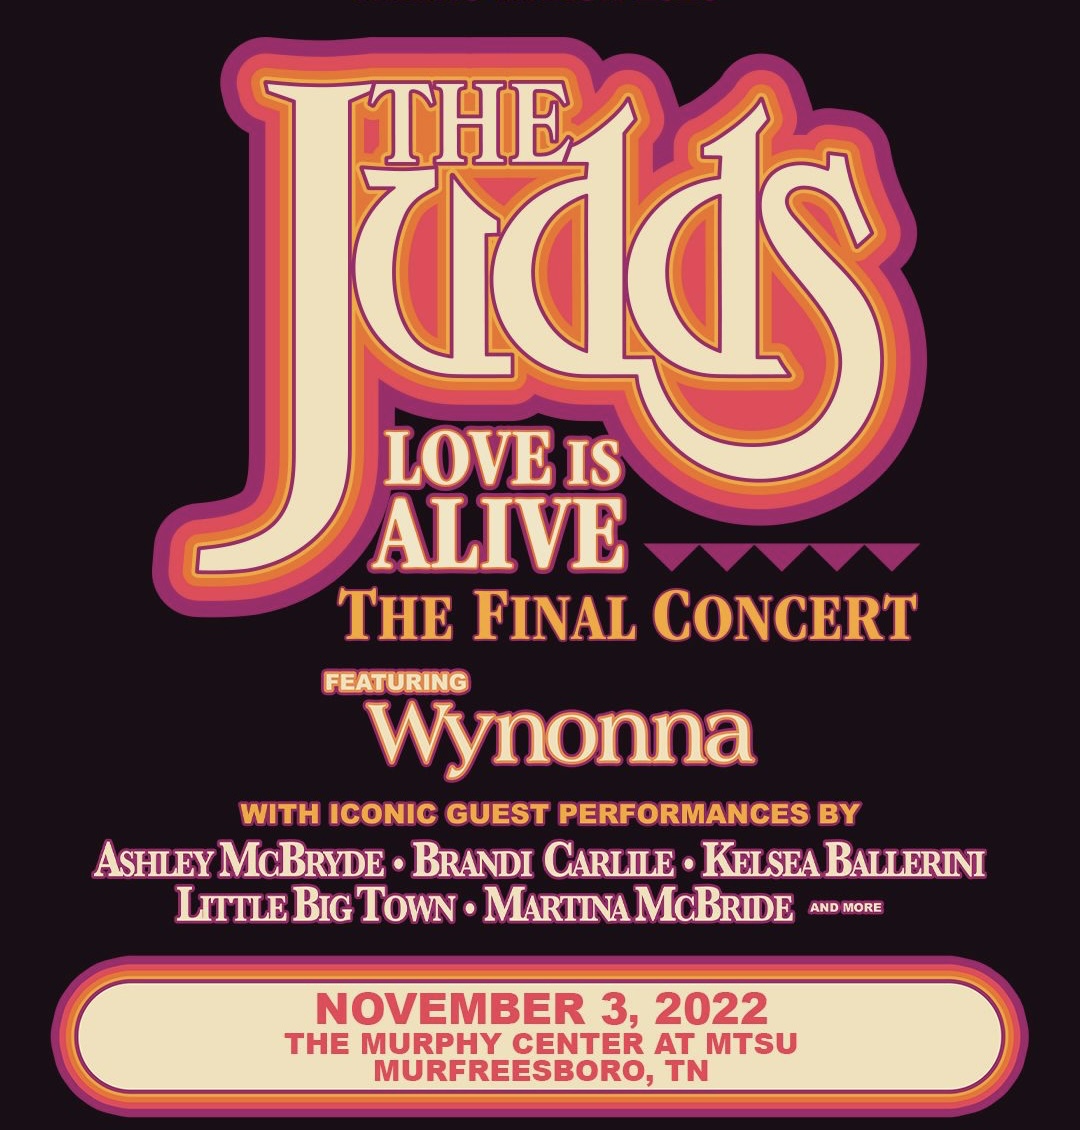 Promotional image for The Judds' final performance concert.